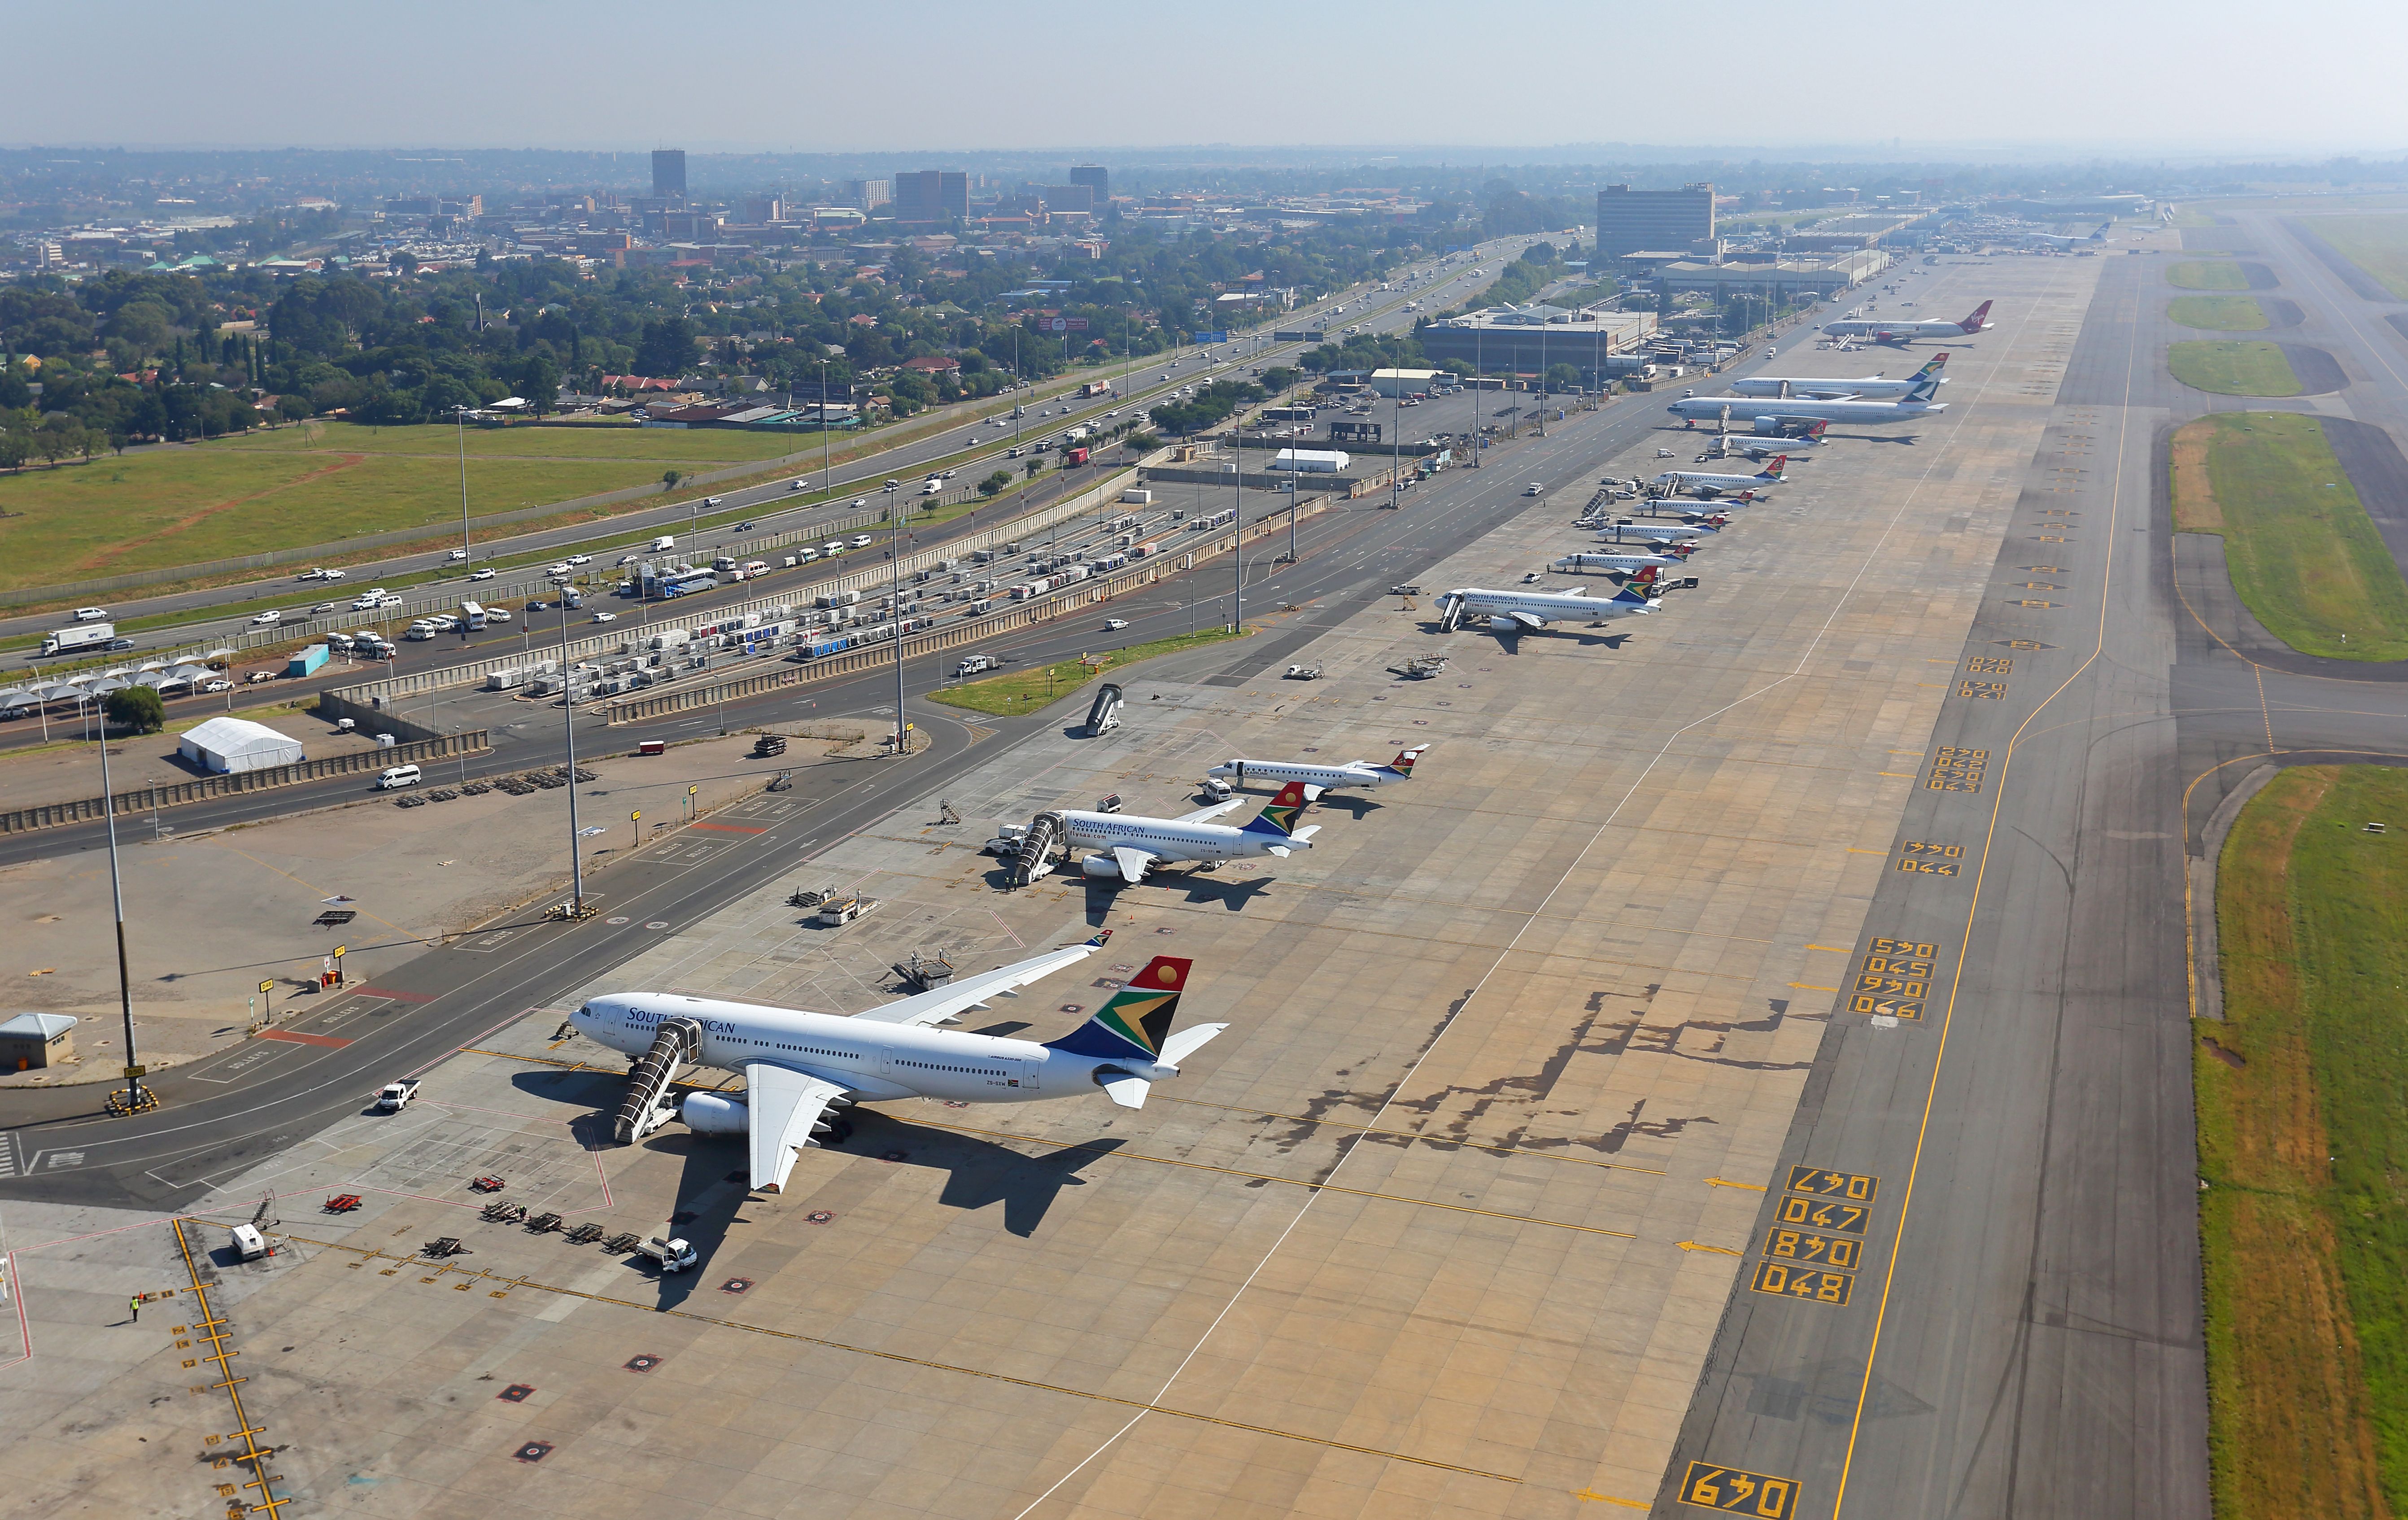 South African Airways at International Airport